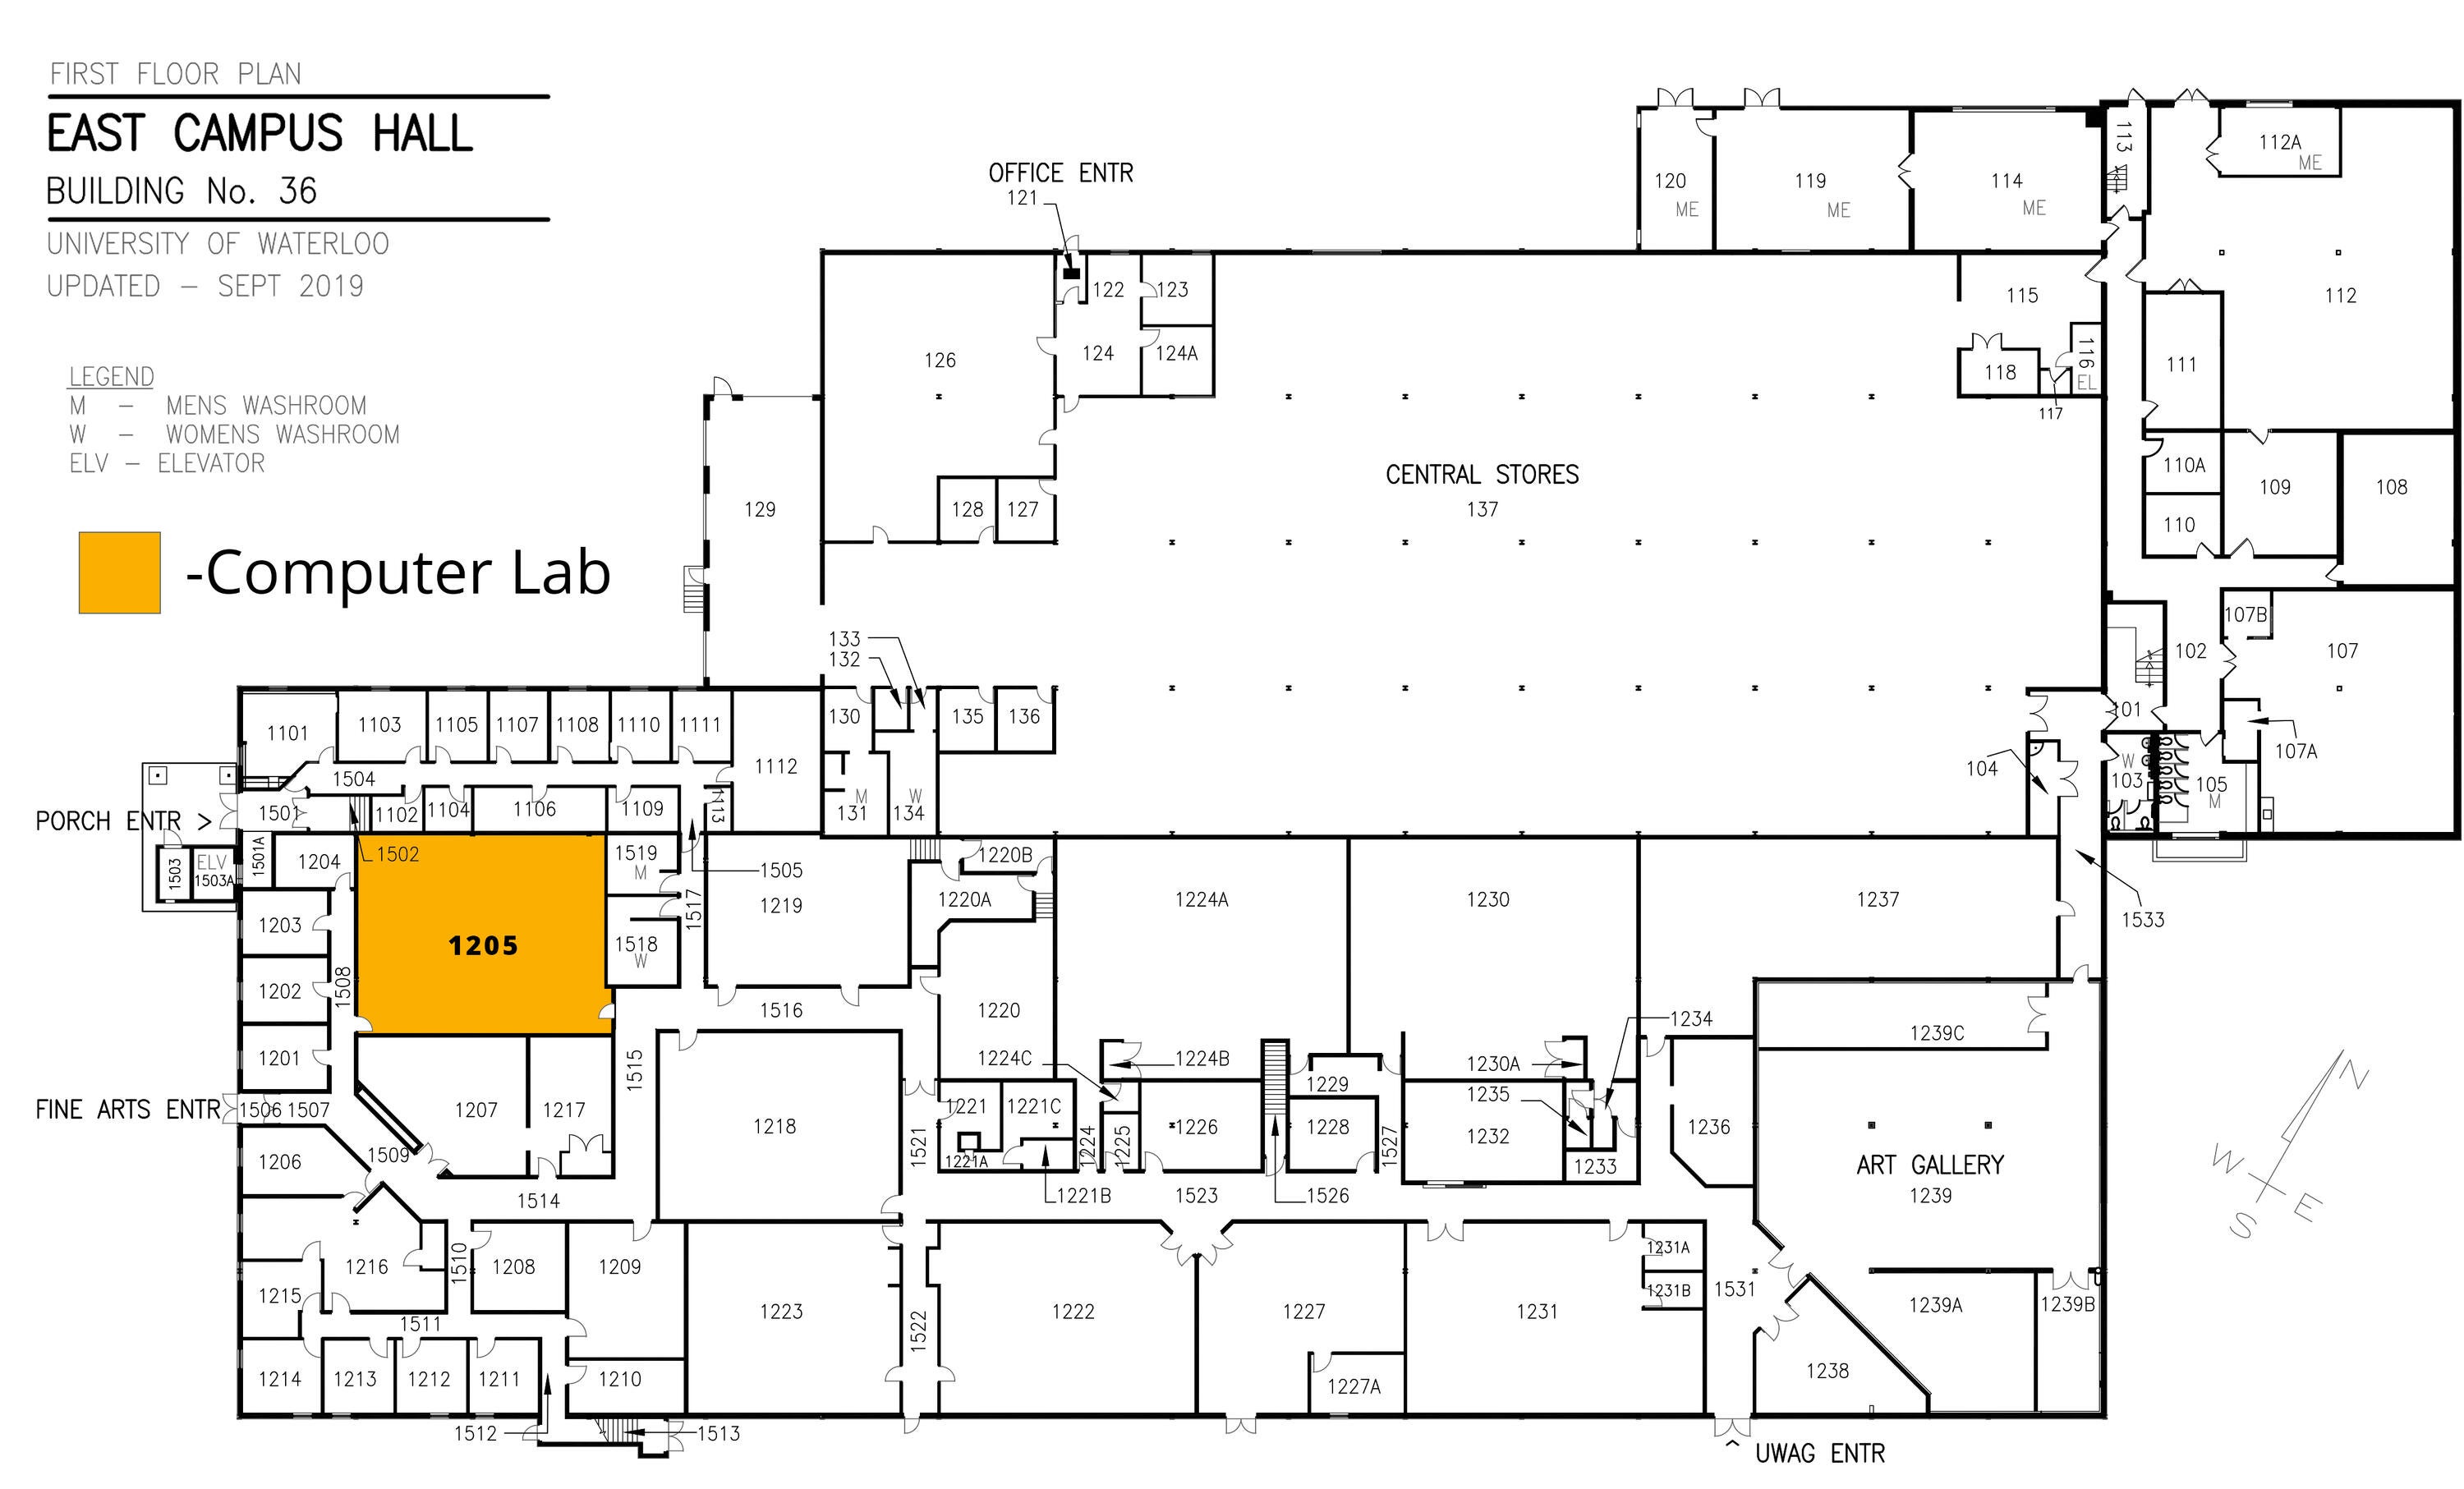 A map of the arts computing office's facilities in East Campus Hall. There is a computer lab in ECH-1205.